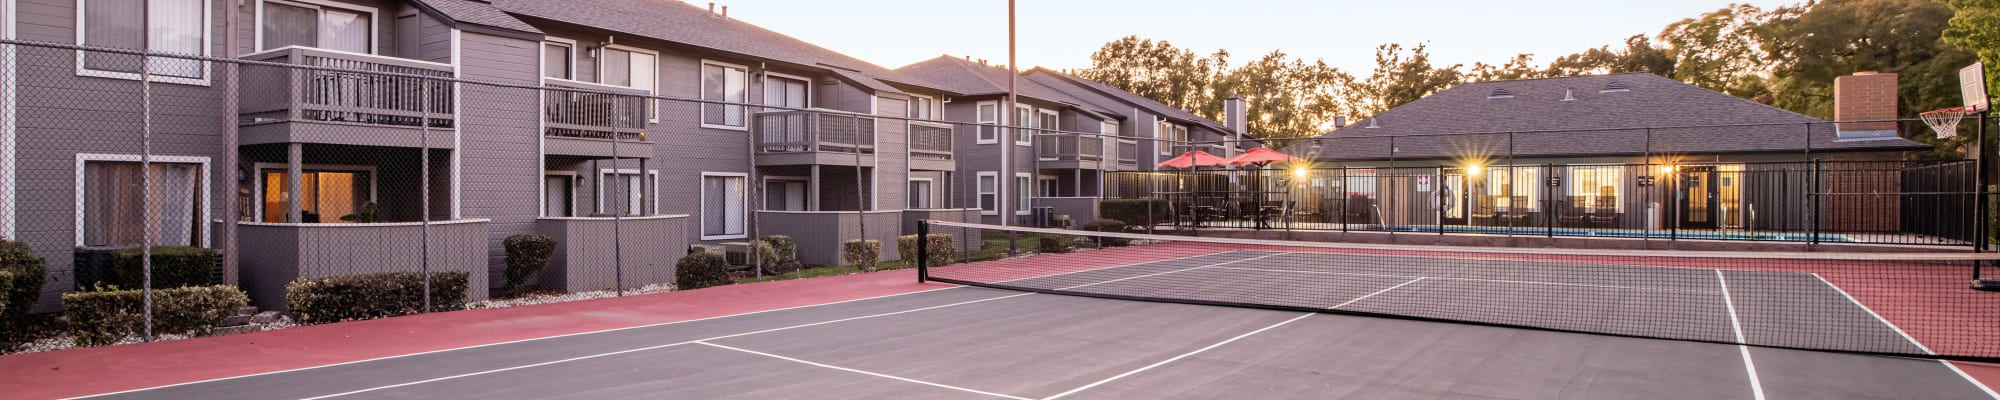 Photo gallery at Sandpiper Village Apartment Homes in Vacaville, California